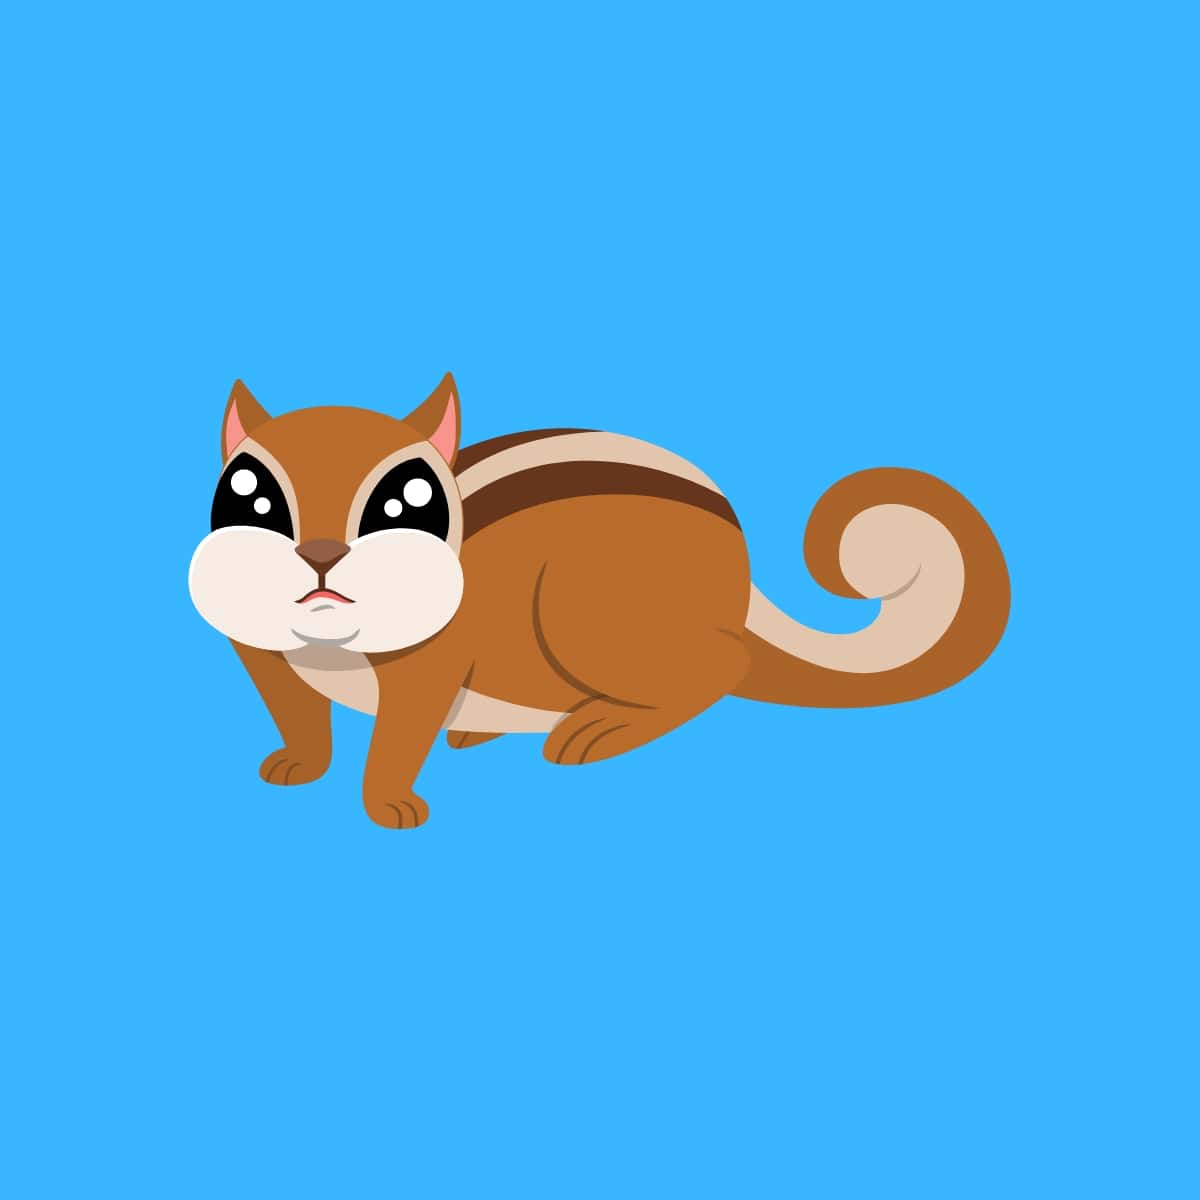 Cartoon graphic of a chipmunk with big eyes on a blue background.